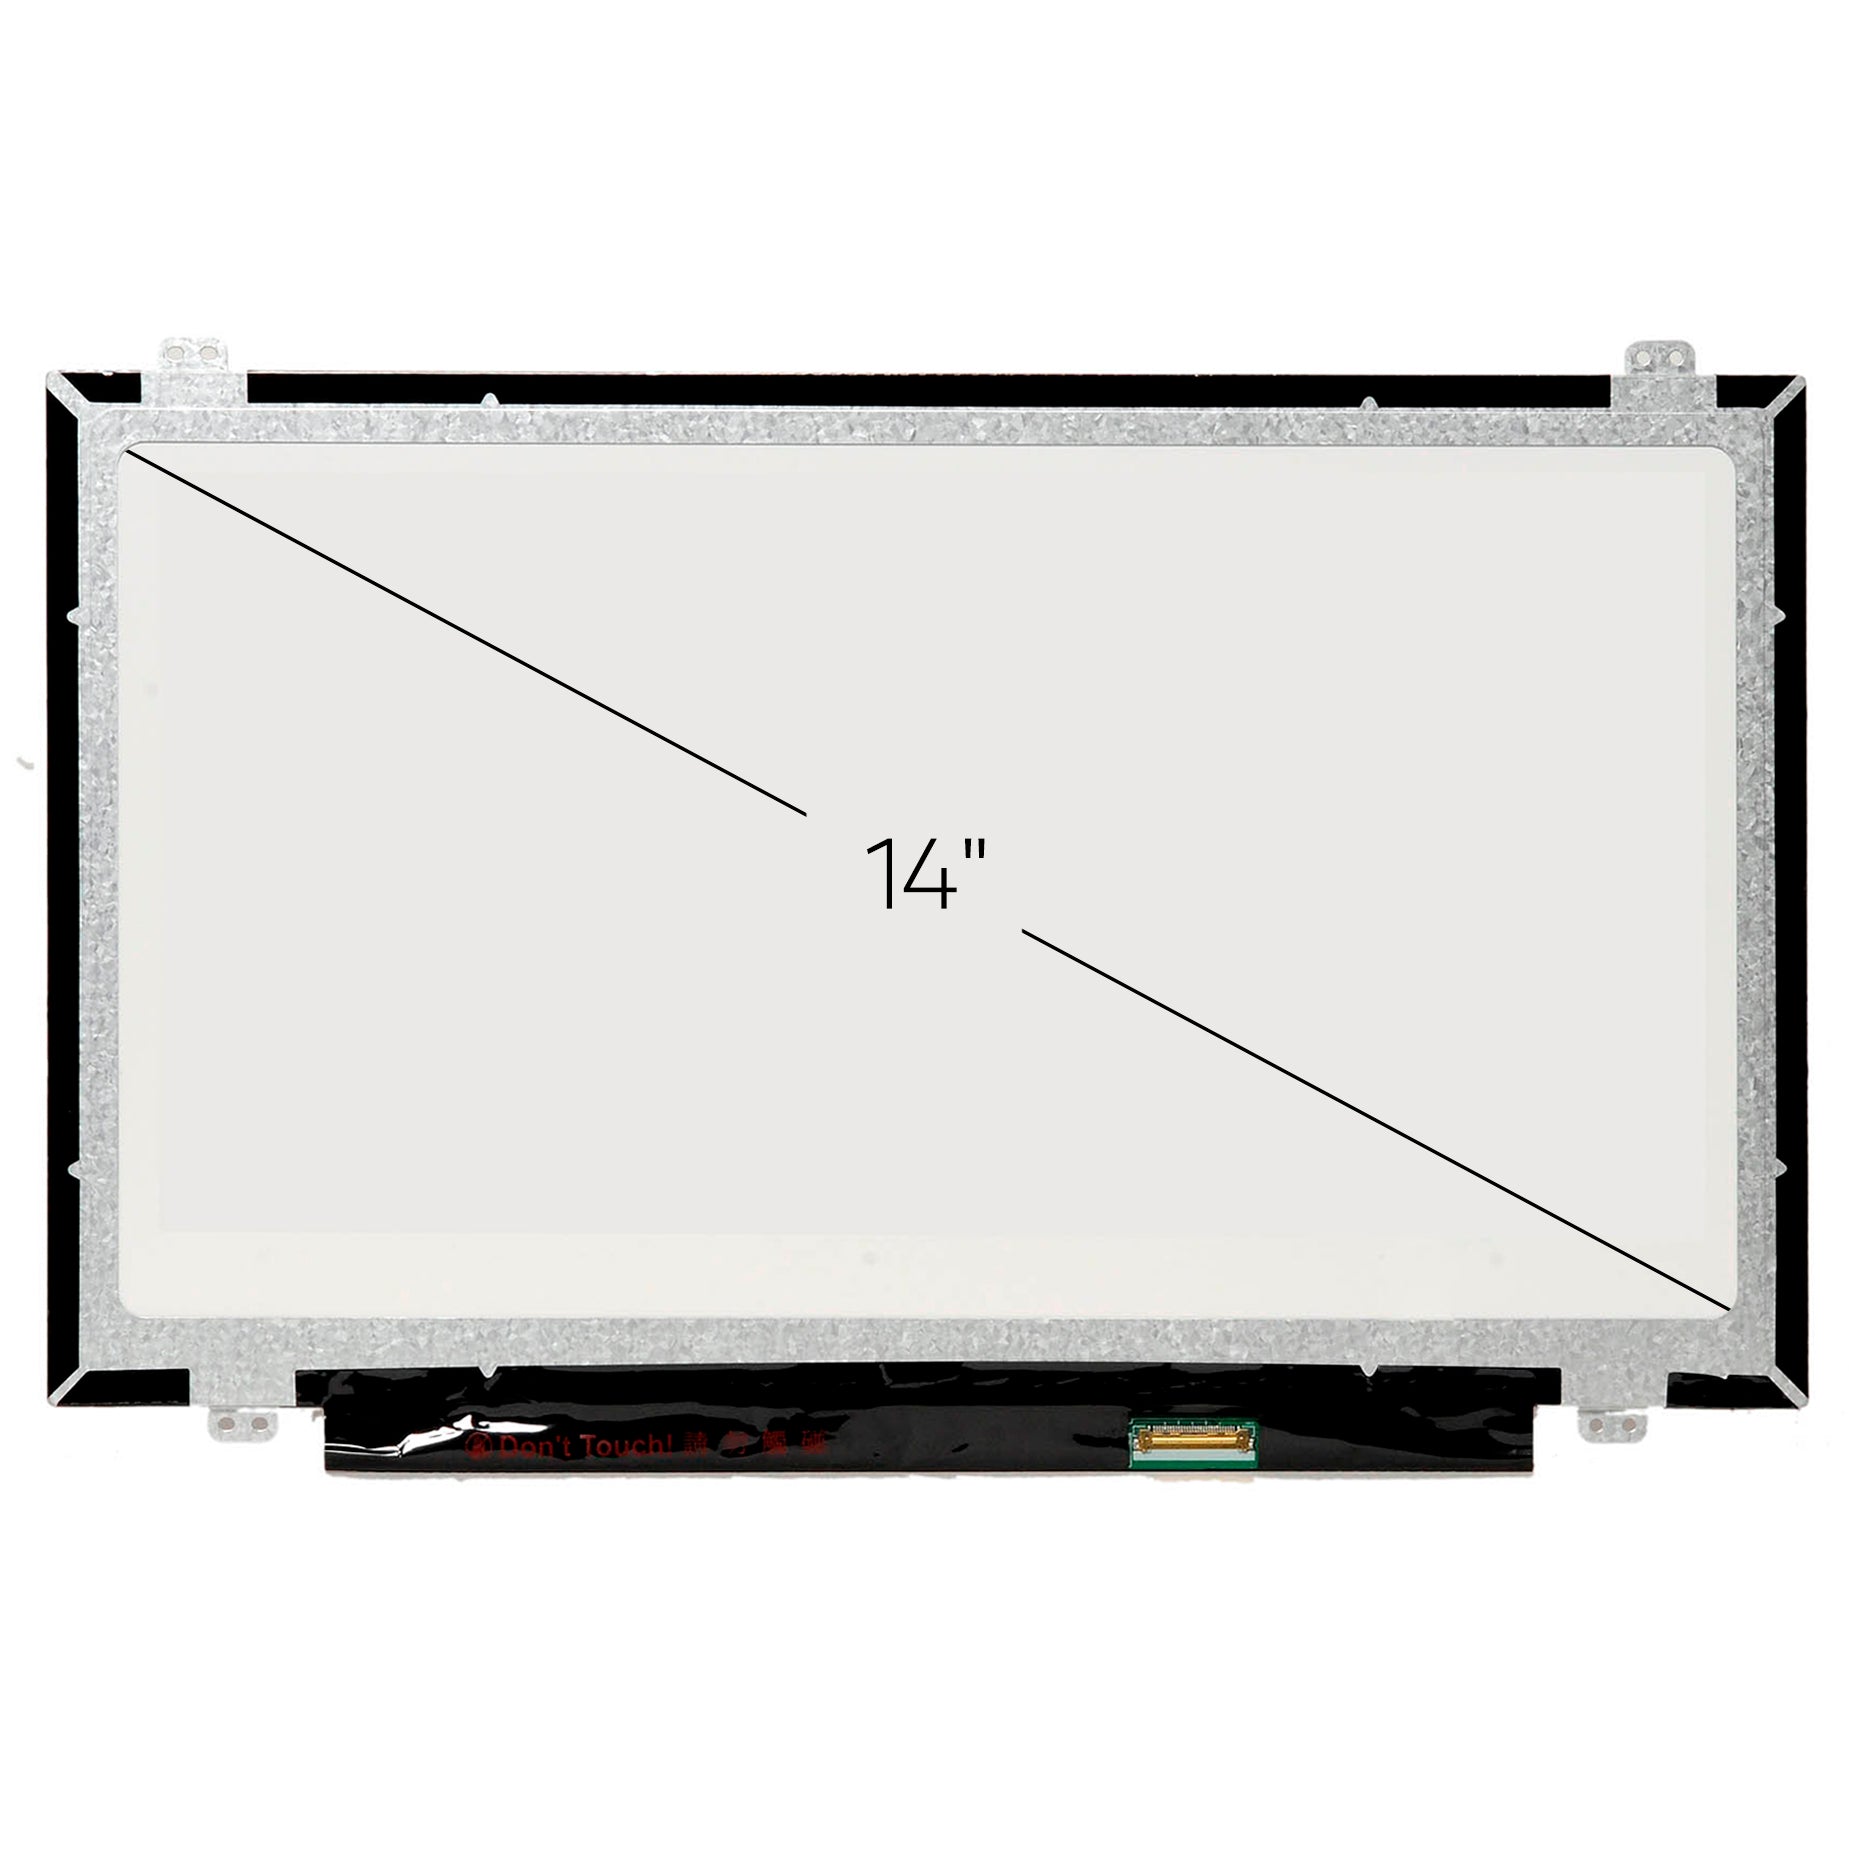 Screen Replacement for Dell Latitude 5490 HD 1366x768 Glossy LCD LED Display